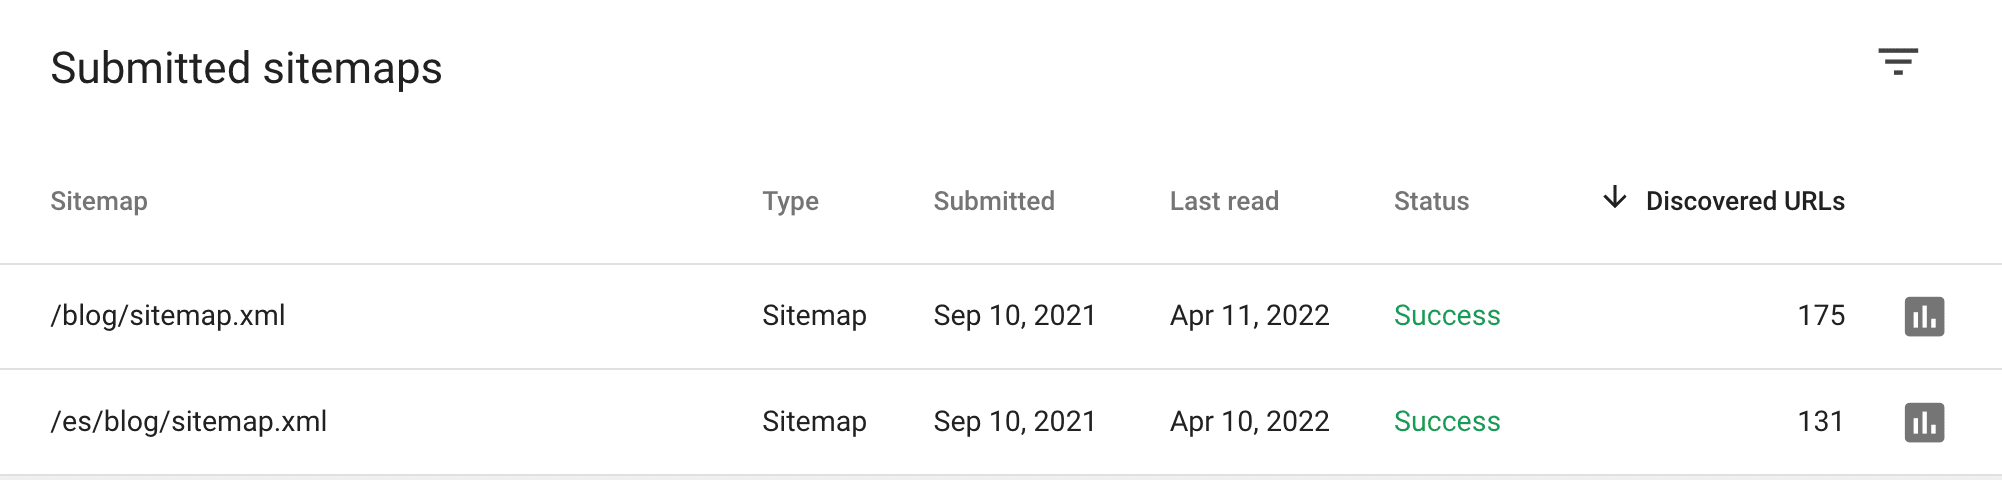 Submitted sitemaps in GSC